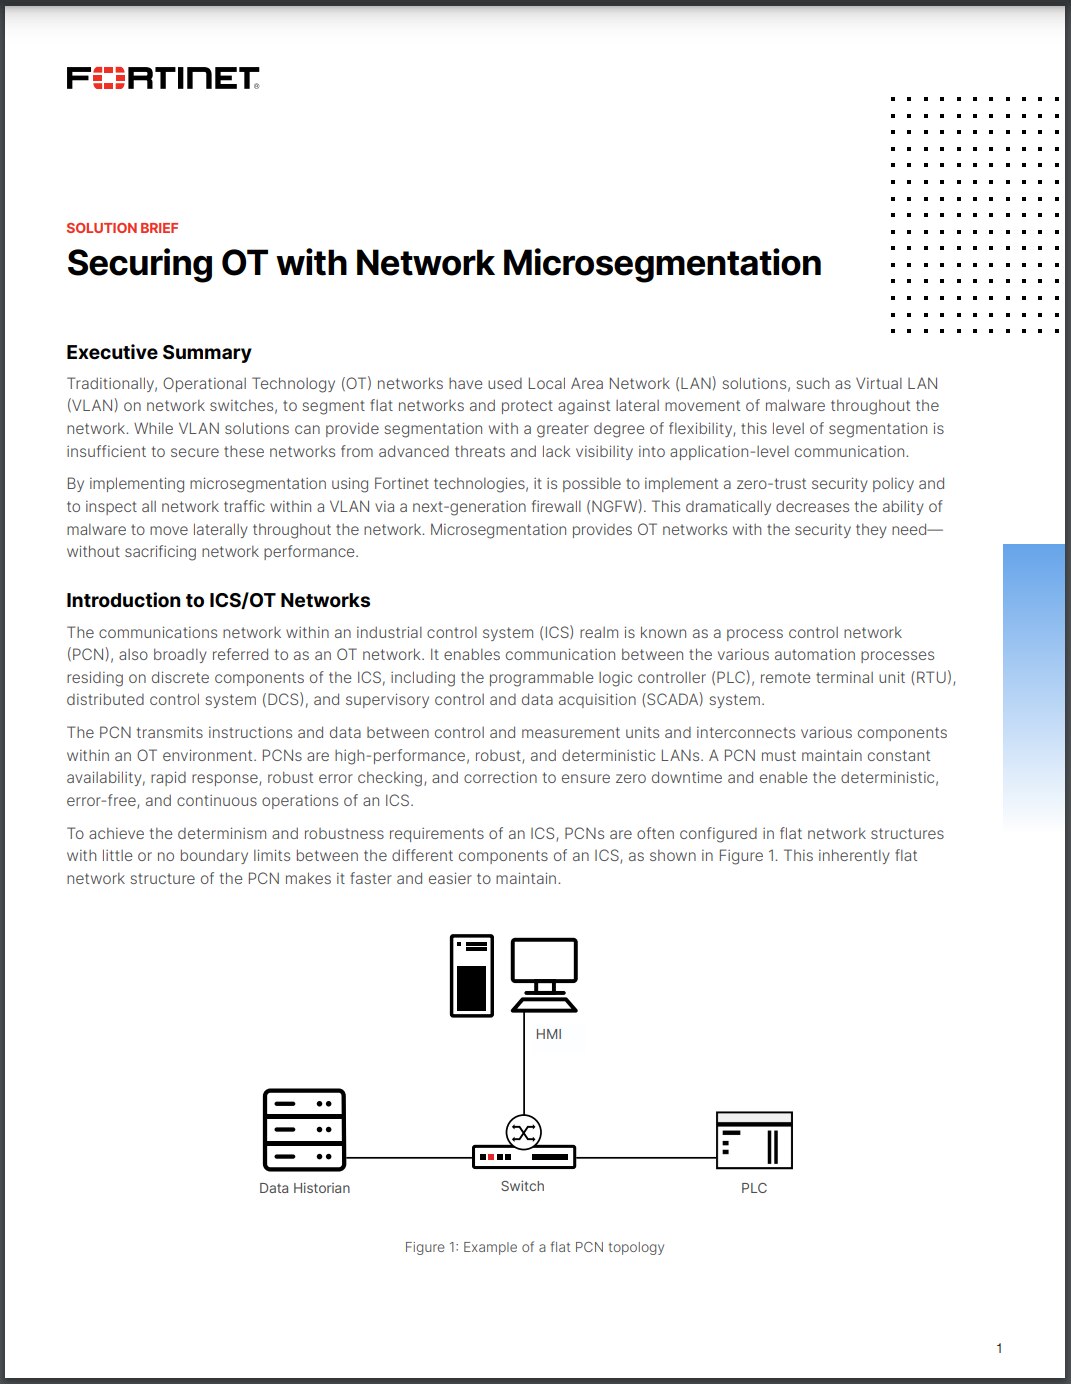 SB-Securing OT with Network Microsegmentation (sold in package, 10pc per package)